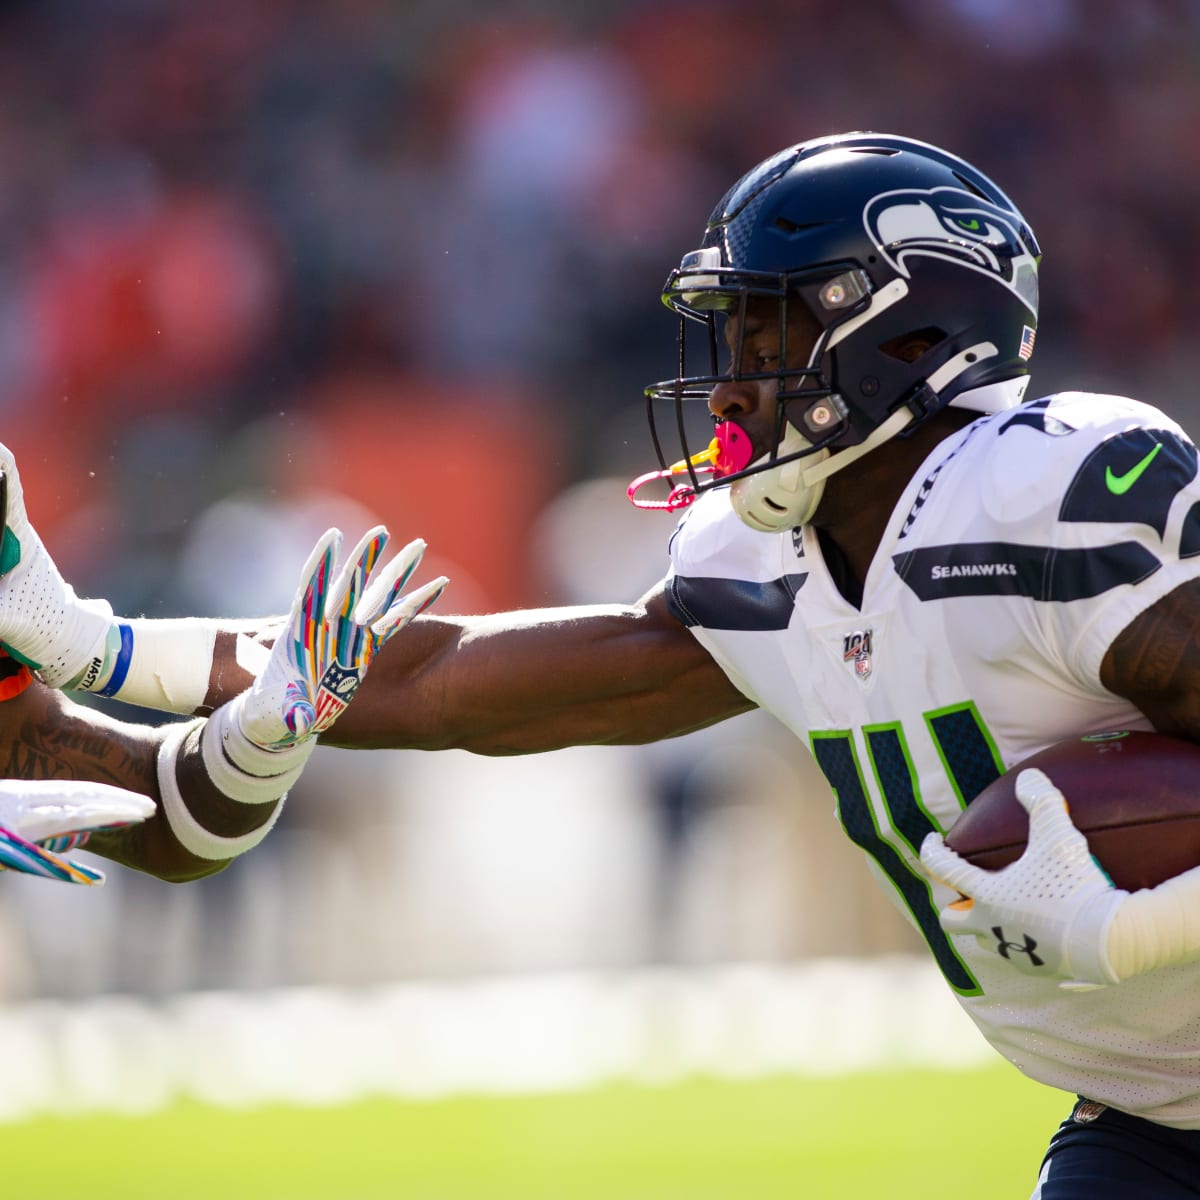 After offseason hype, Seahawks' Metcalf settling in - The Columbian